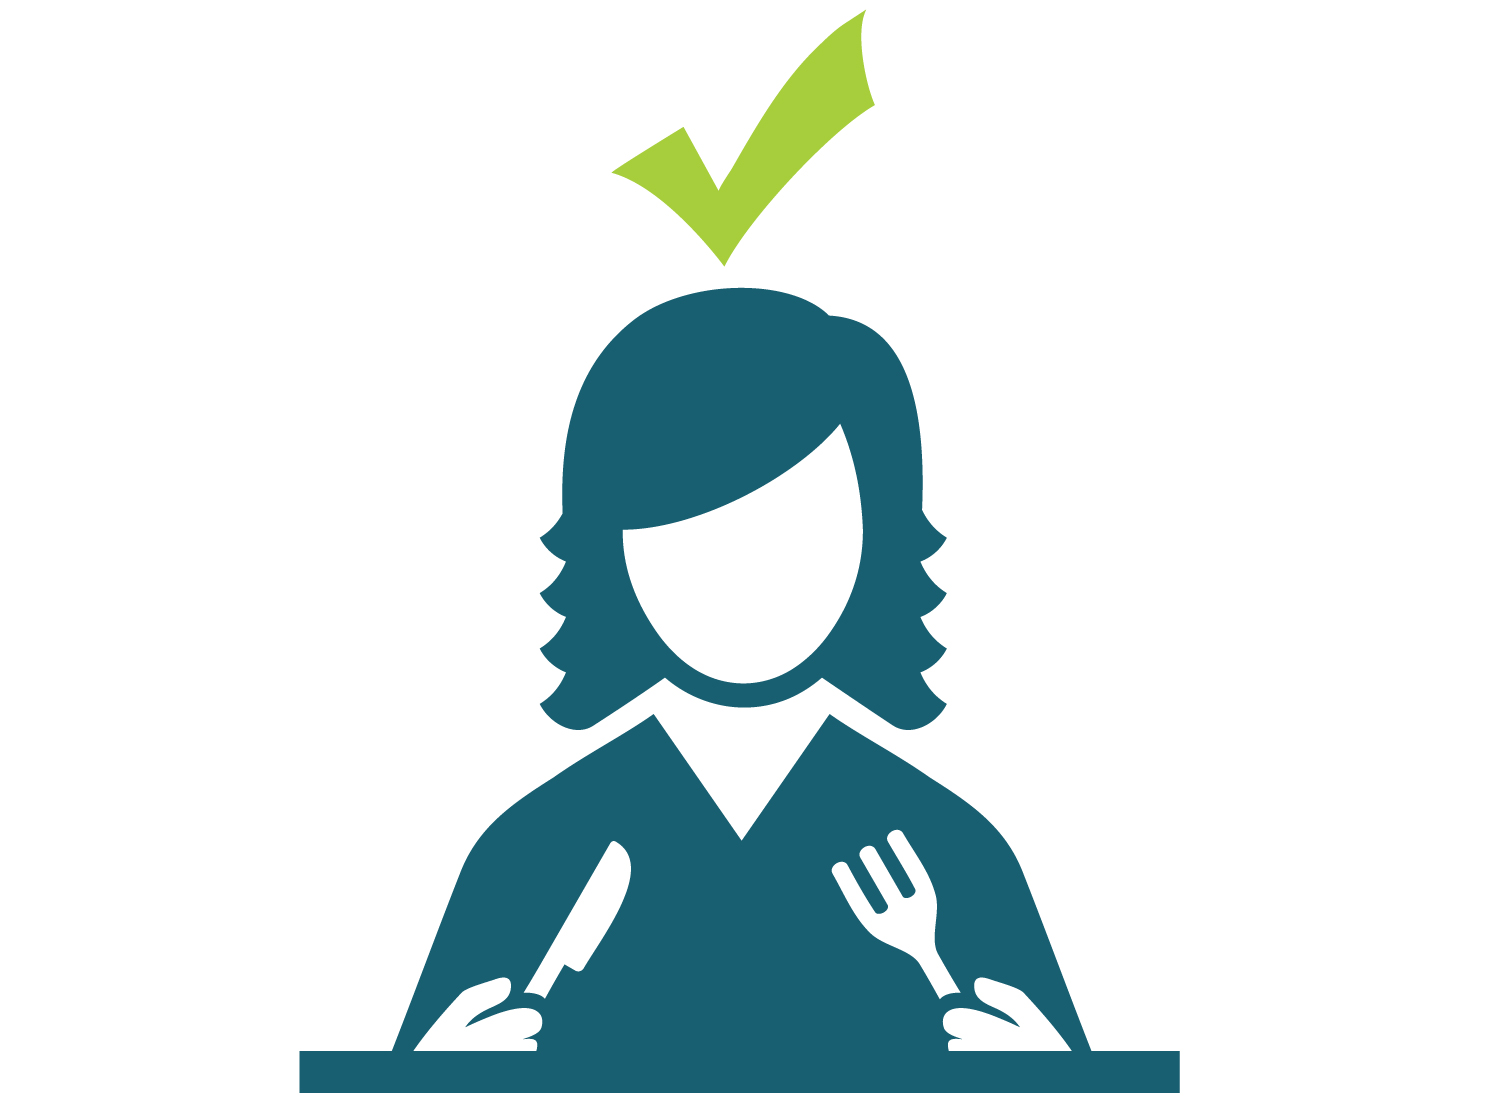 Image of person eating with fork and knife and green check mark over head